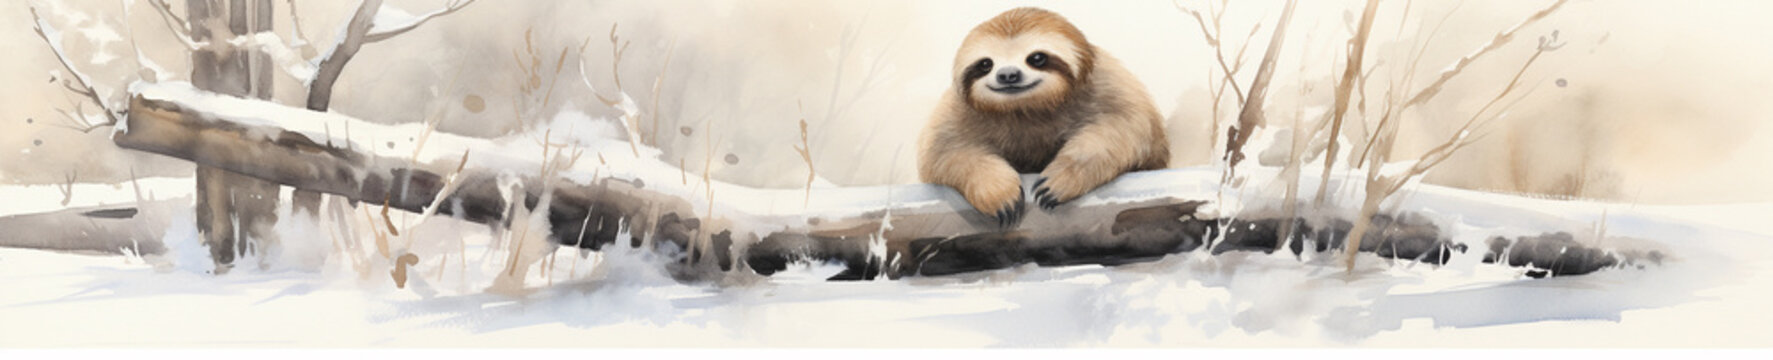 A Minimal Watercolor Banner of a Sloth in a Winter Setting